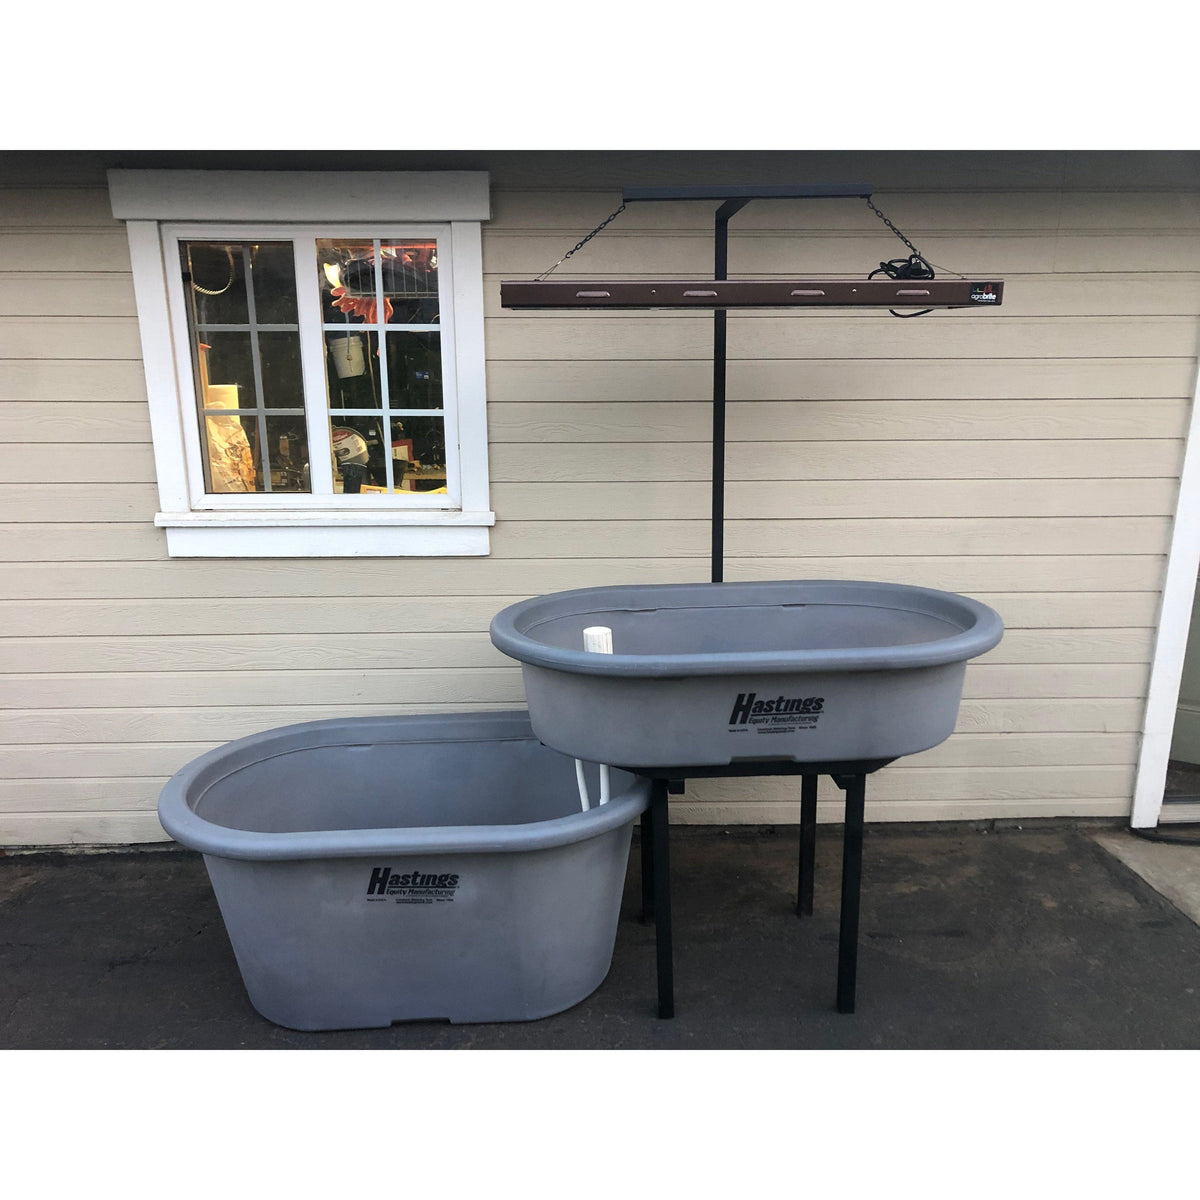 Two gray Go Green Aquaponics System tubs, resembling fish tanks, sitting outside of a house.